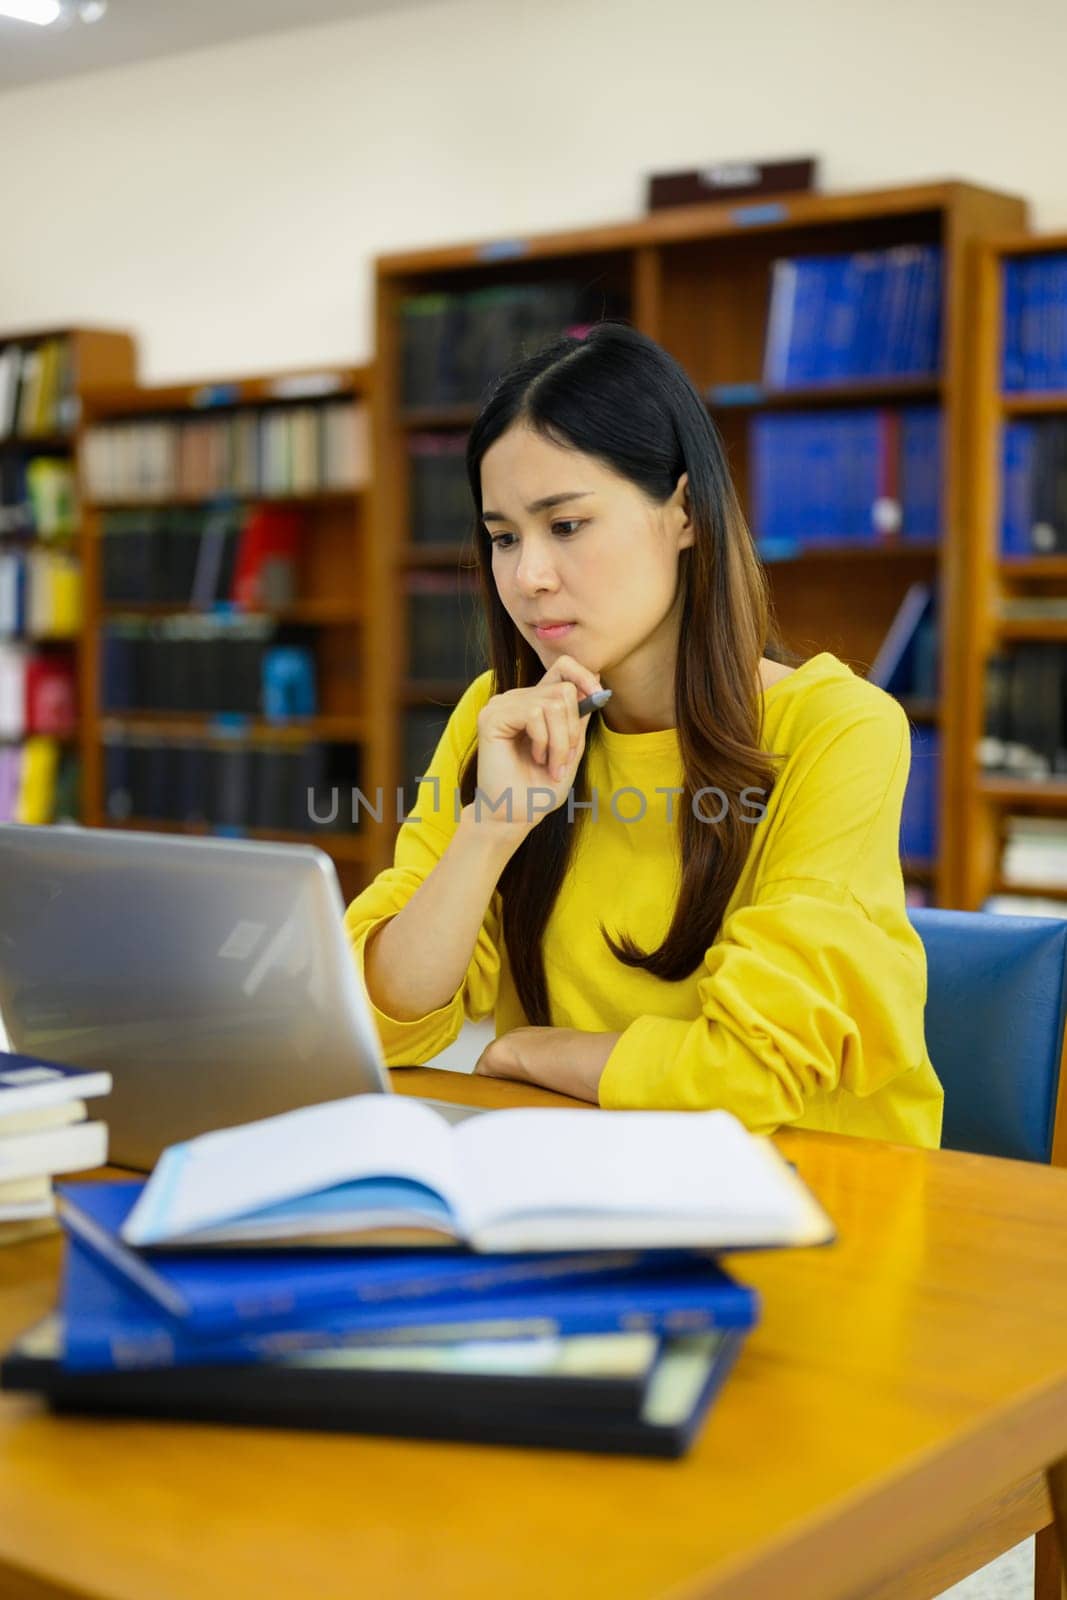 Focused female university student doing research on laptop, learning lessons, preparing for exams in library.